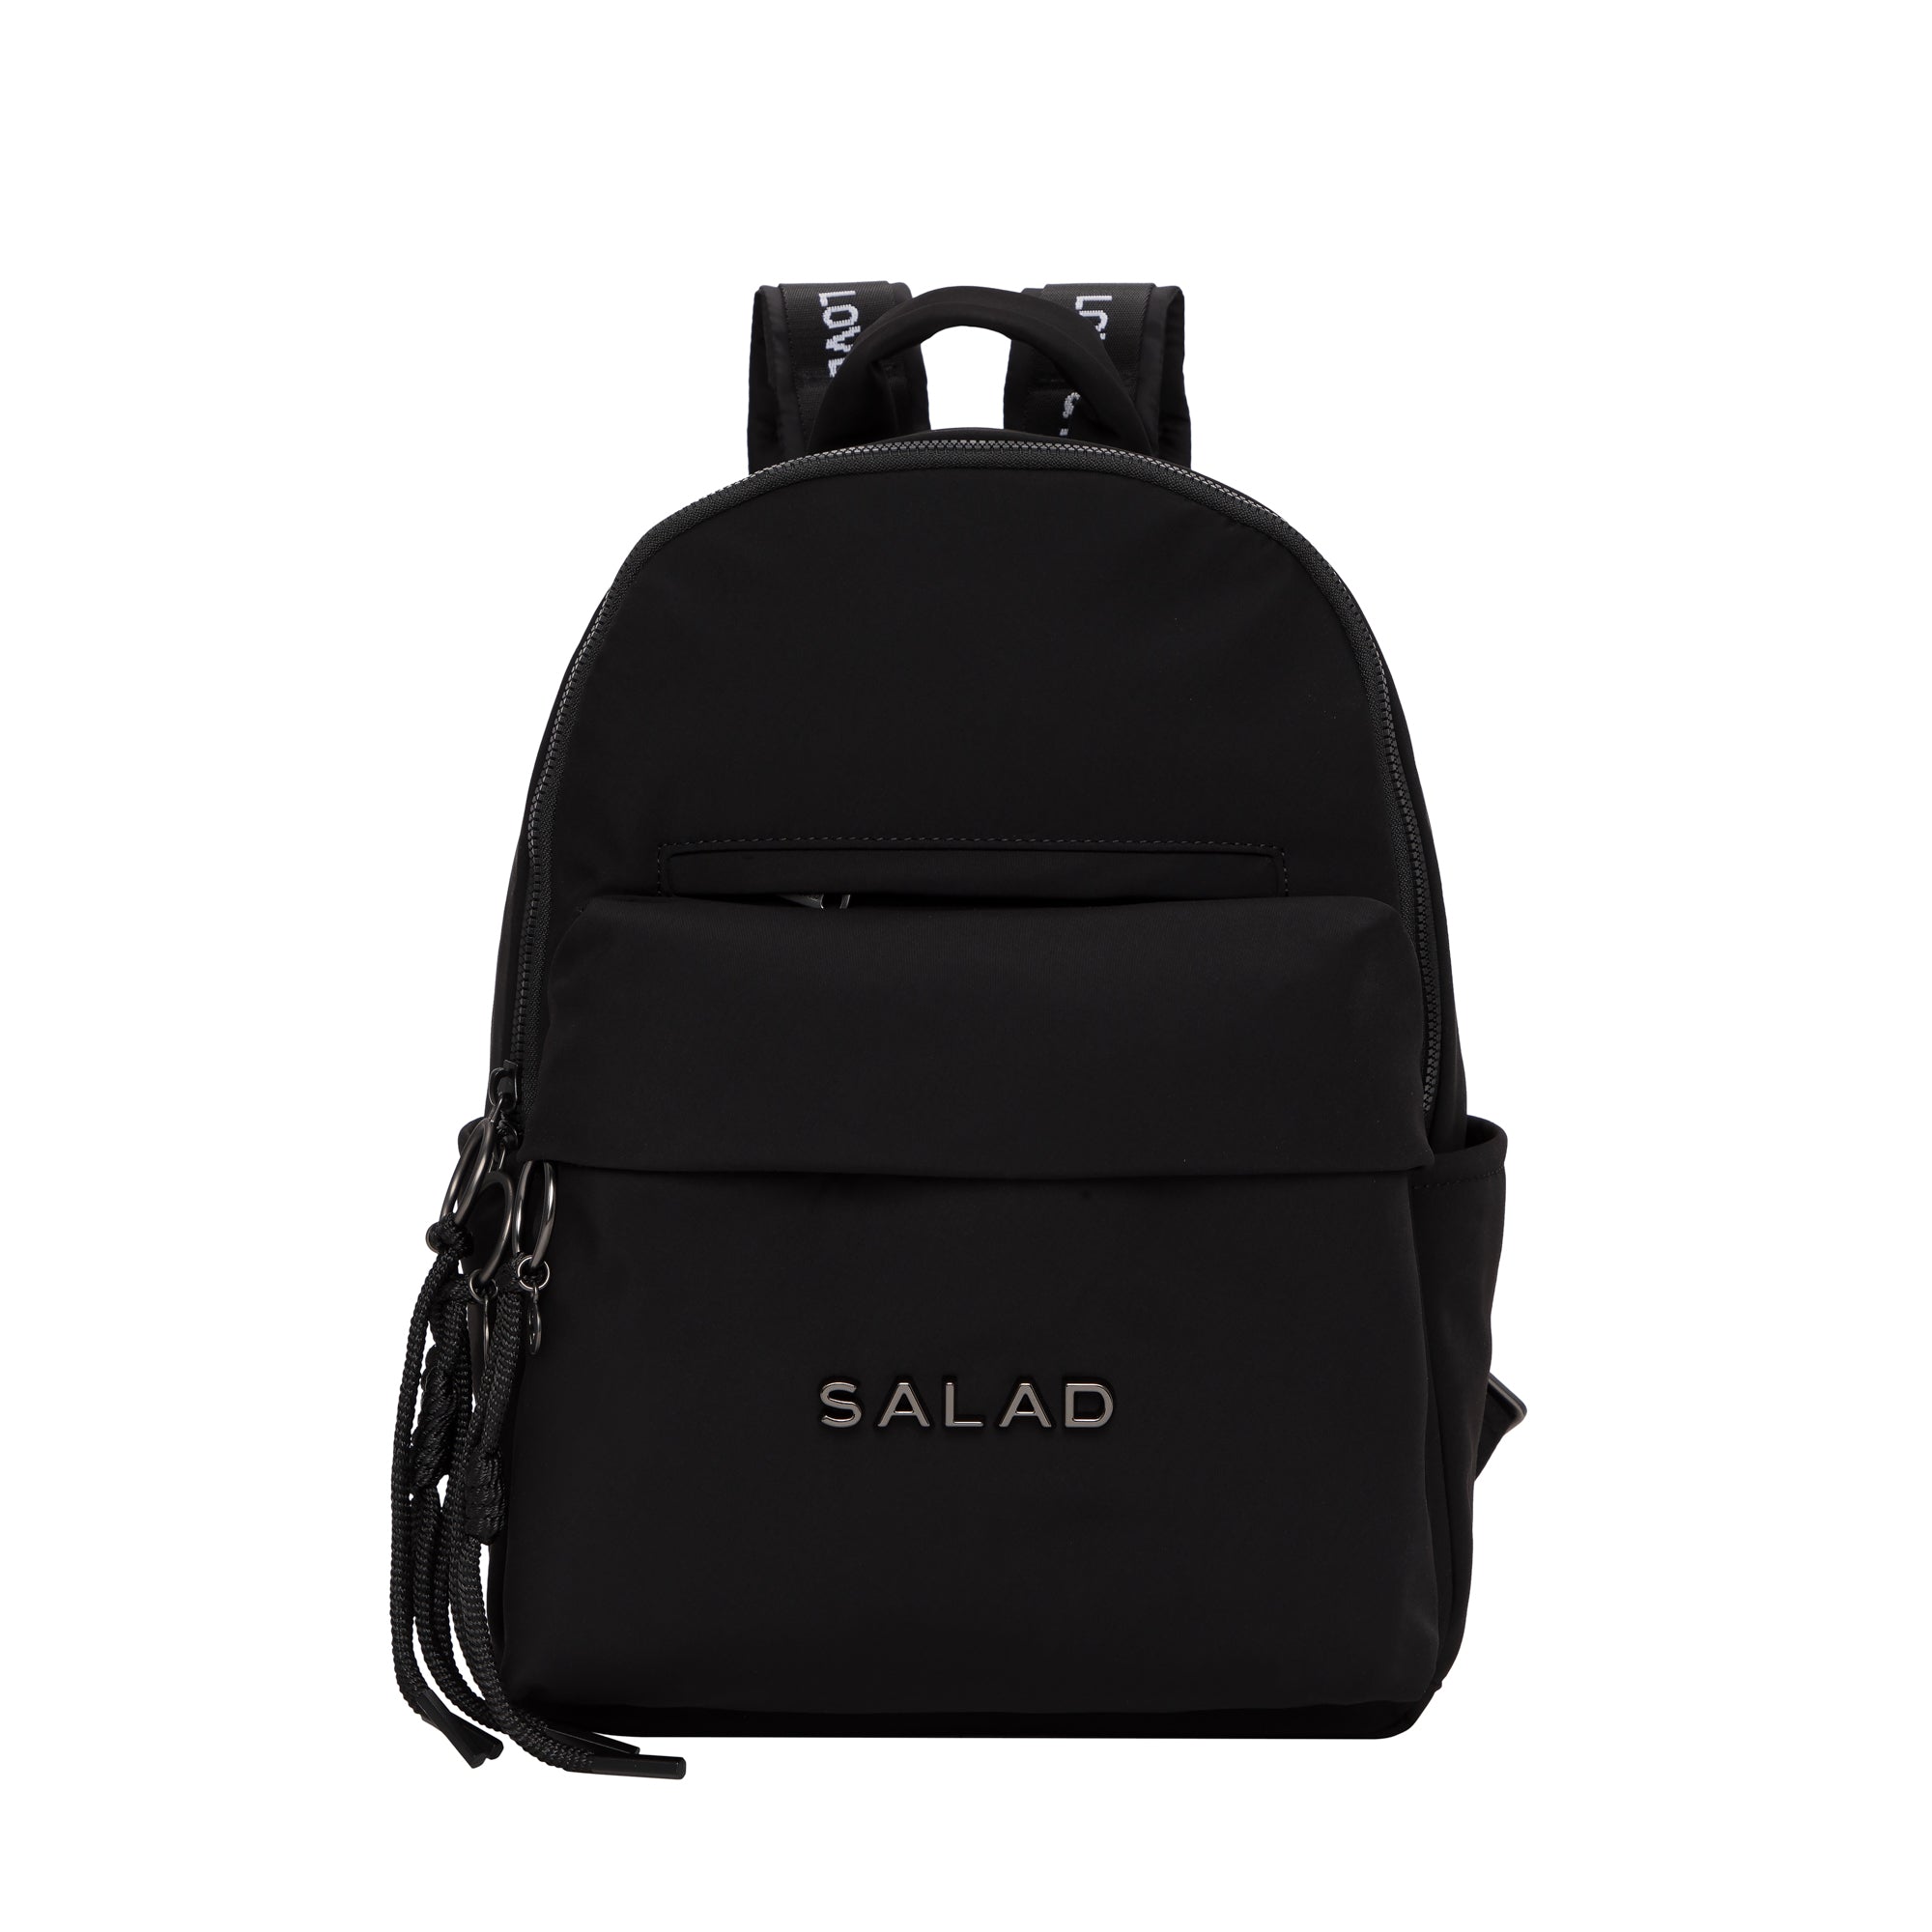 Salad Sporty Roundy Backpack #SB219-007